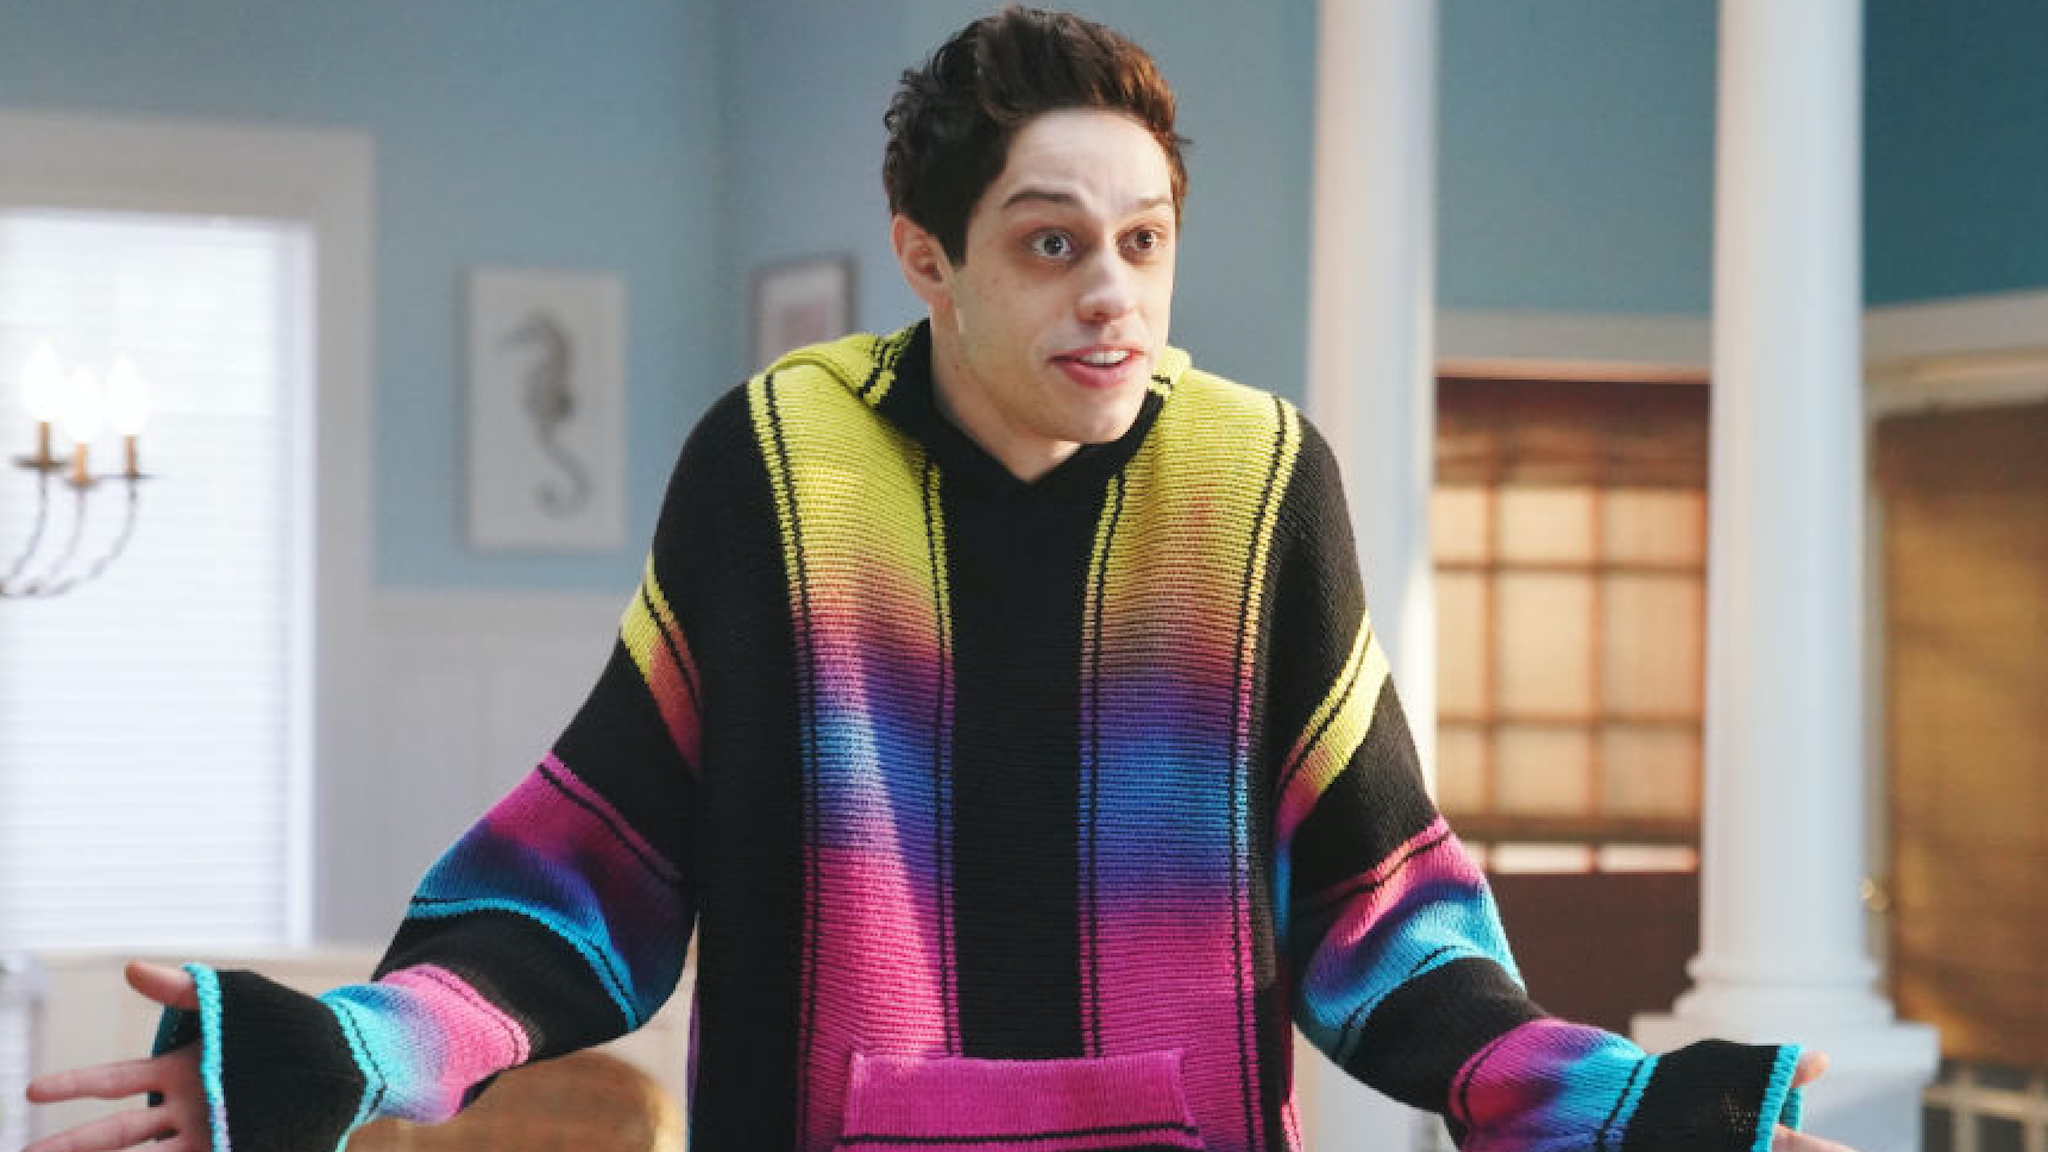 SATURDAY NIGHT LIVE -- "Paul Rudd" Episode 1767 -- Pictured:Pete Davidson during "A Journey Through Time" sketch on May 18, 2019